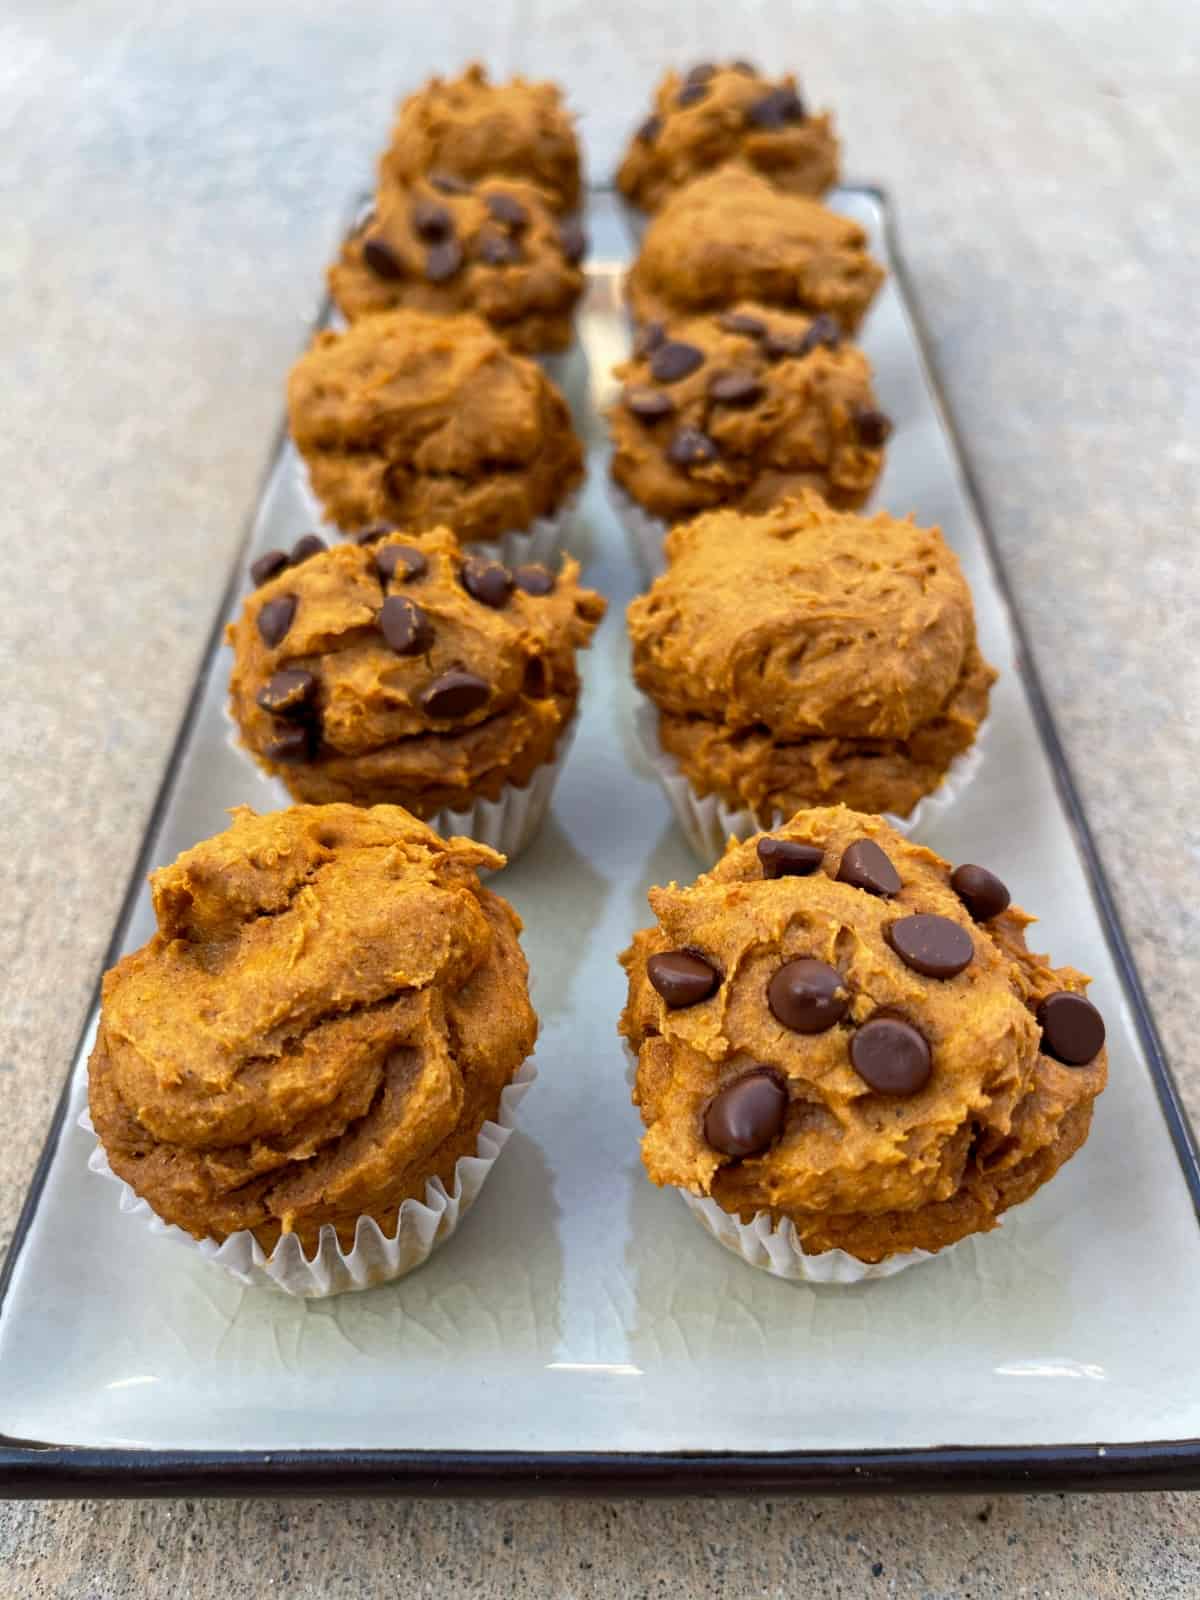 Eight mini pumpkin spice cake mix muffins (half plain and half with miniature chocolate chips) on serving platter.